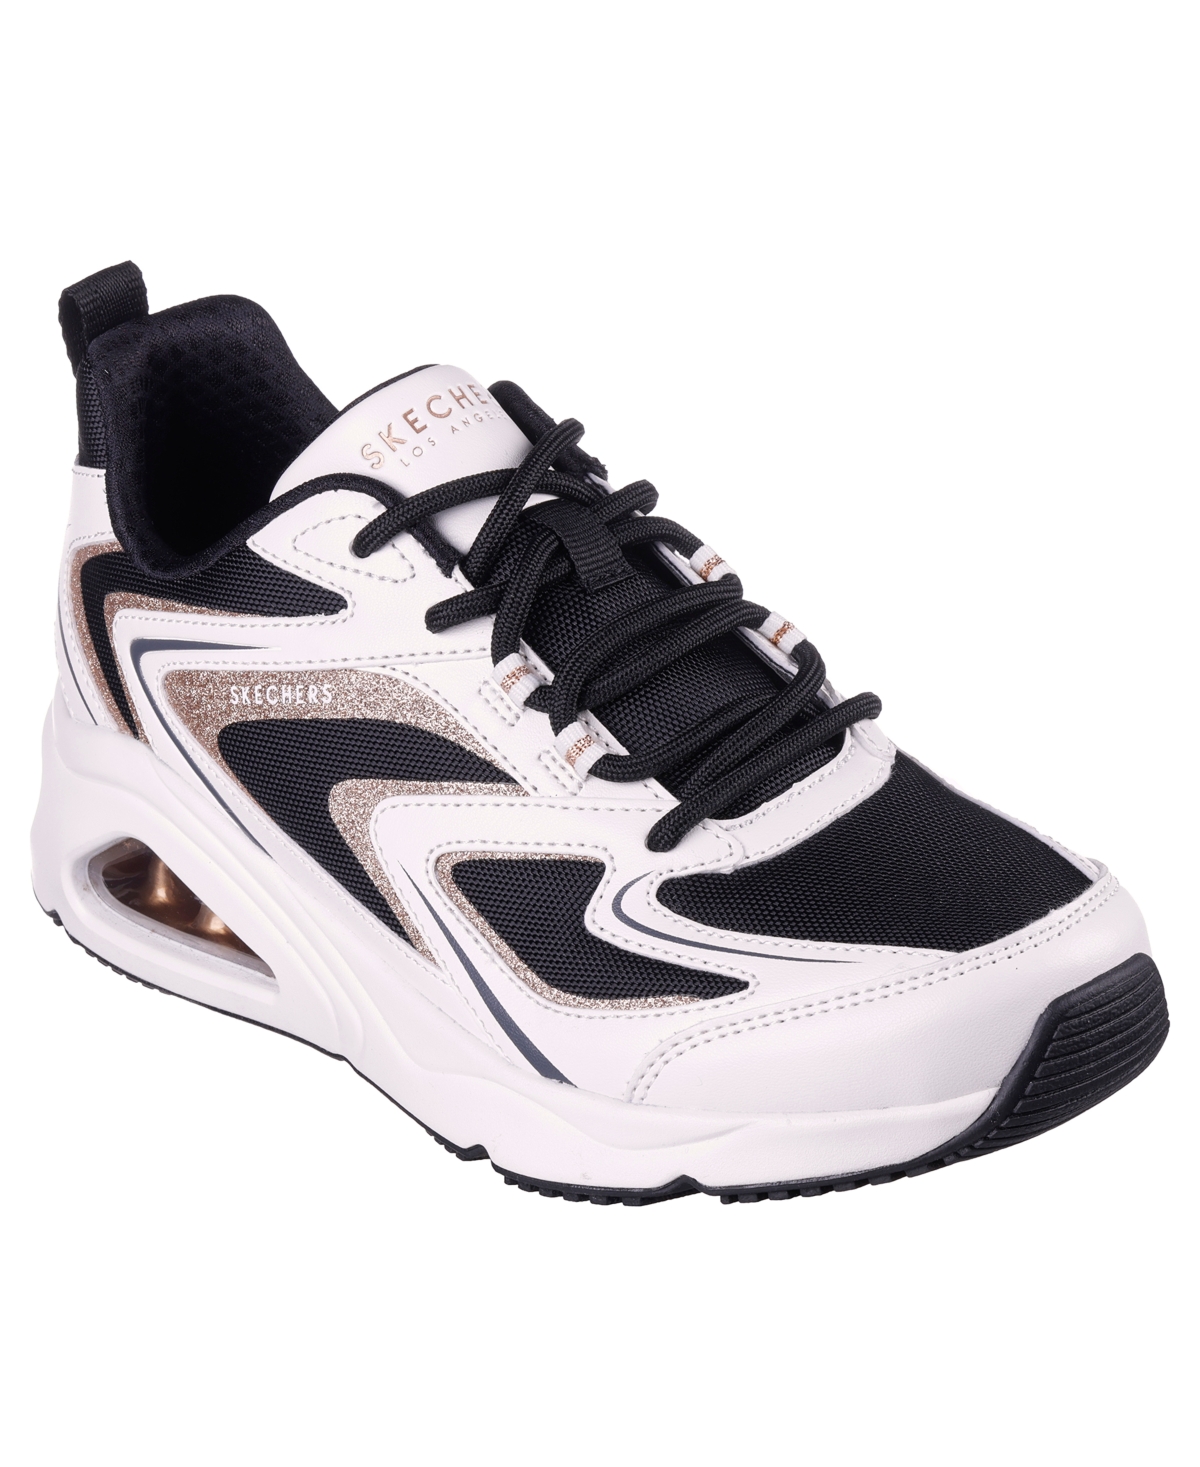 Women's Tres-Air Uno - Street Shimm-Airy Casual Sneakers from Finish Line - White, Black, Gold